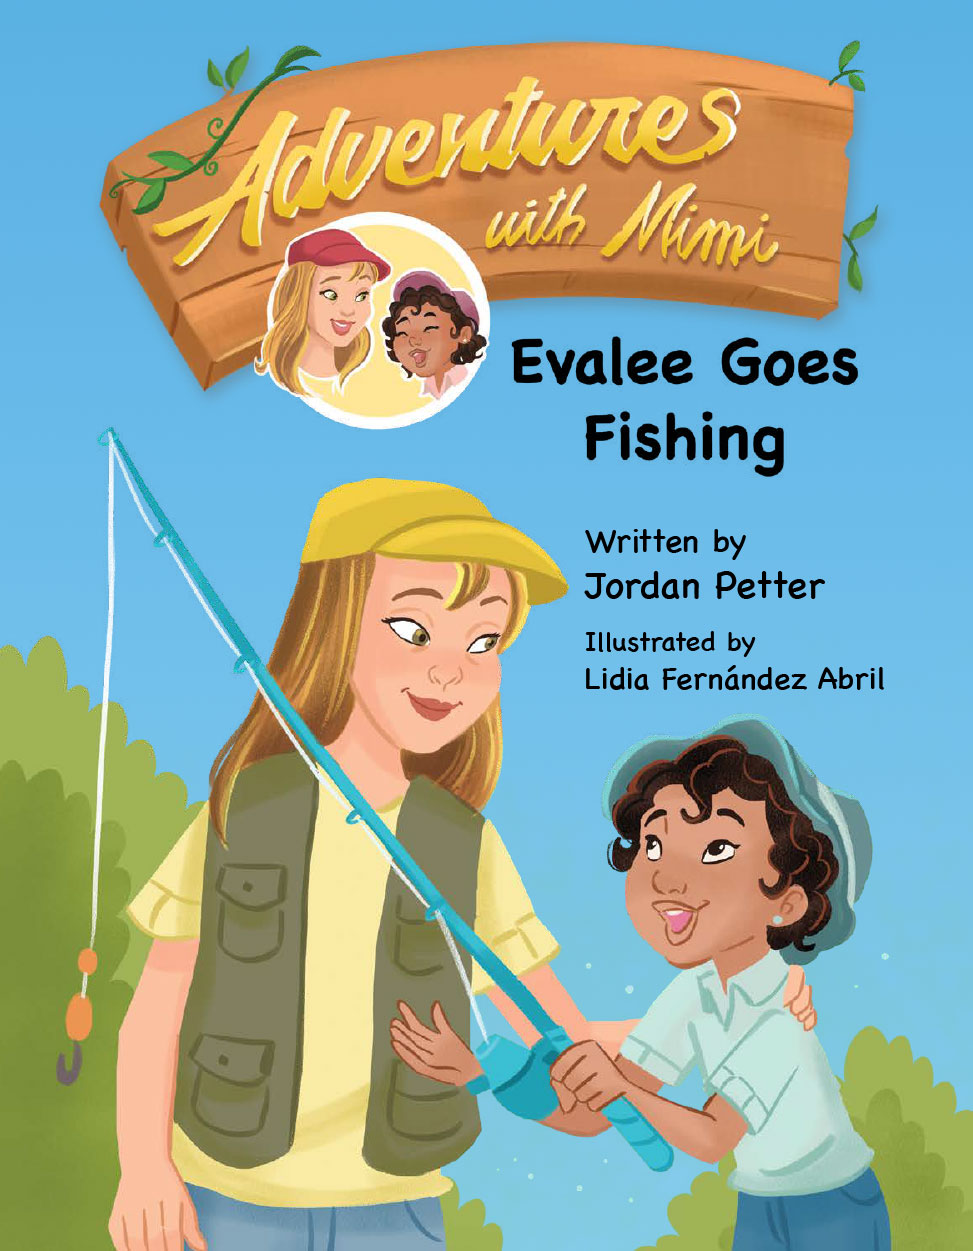 "Adventures with Mimi: Evalee Goes Fishing" by Jordan Petter Book Cover